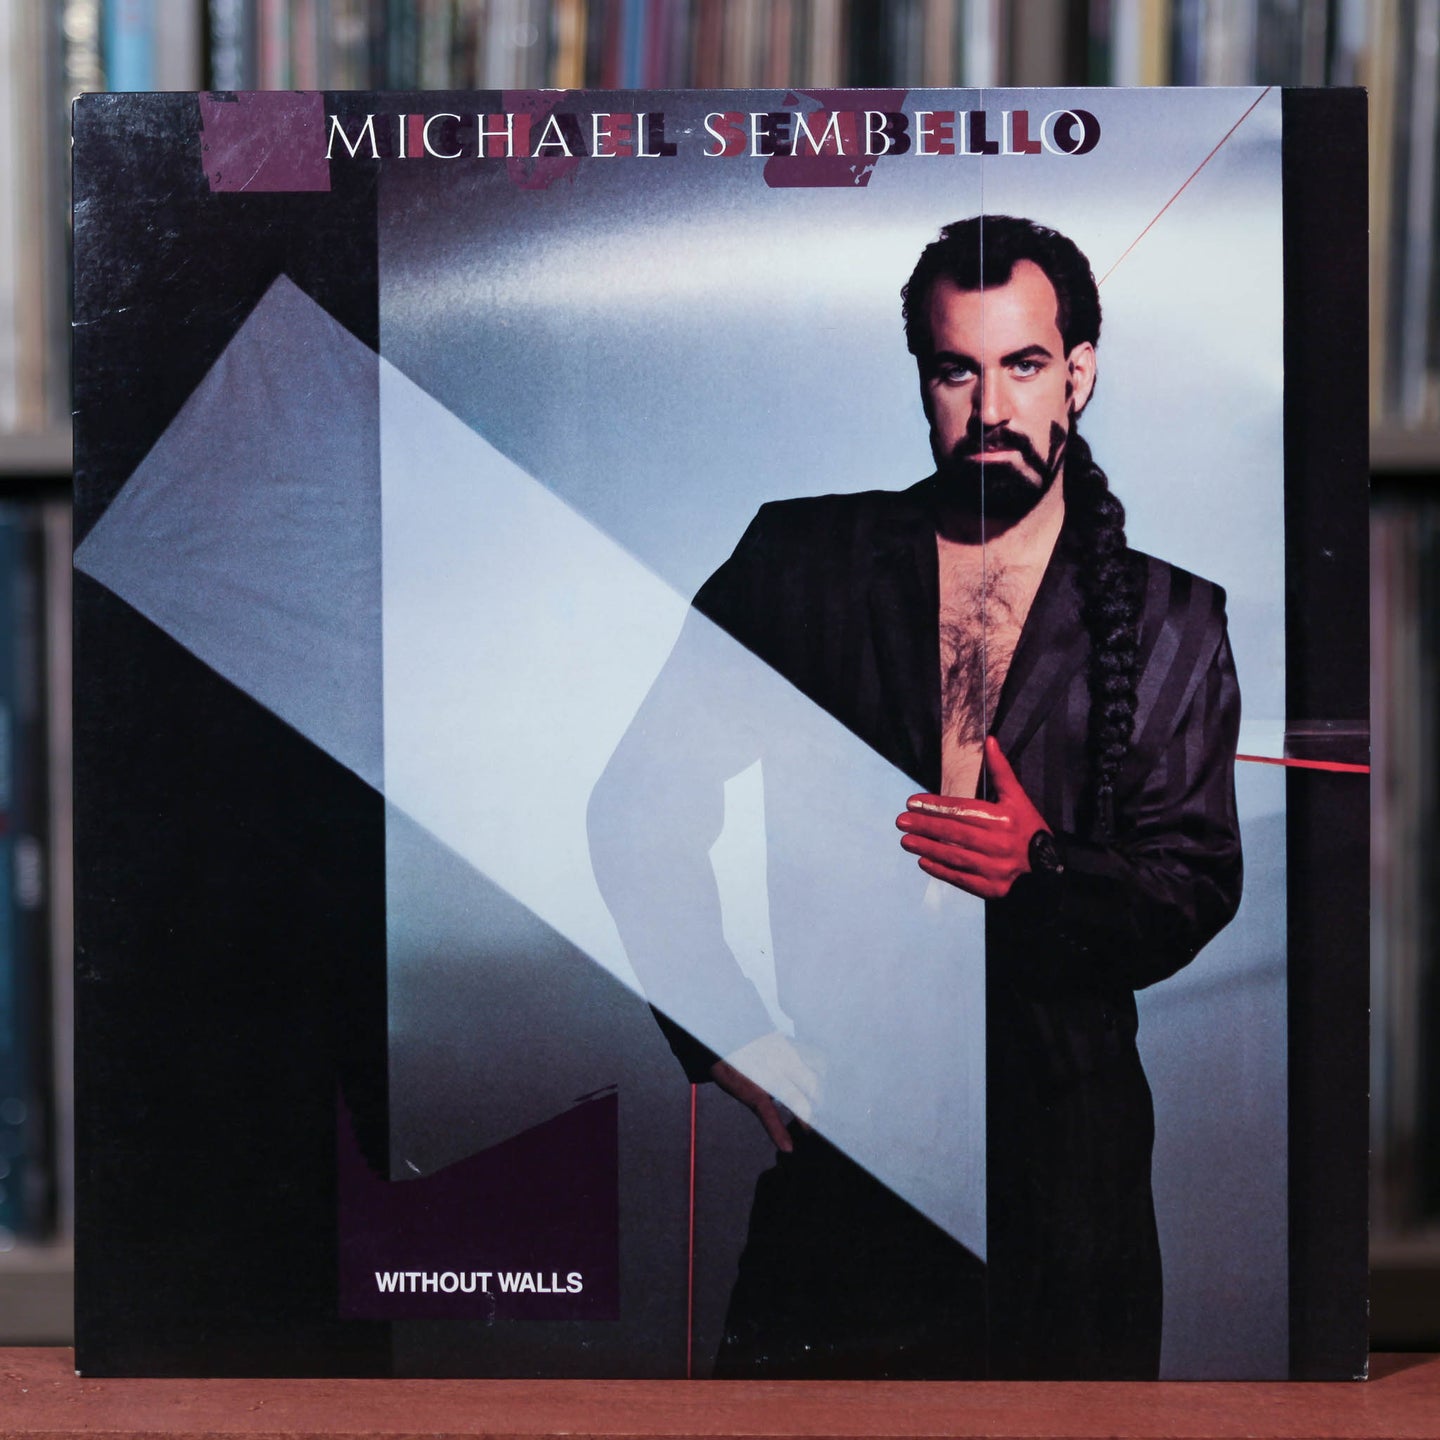 Michael Sembello - Without Walls - 1986 A&M, VG+/EX